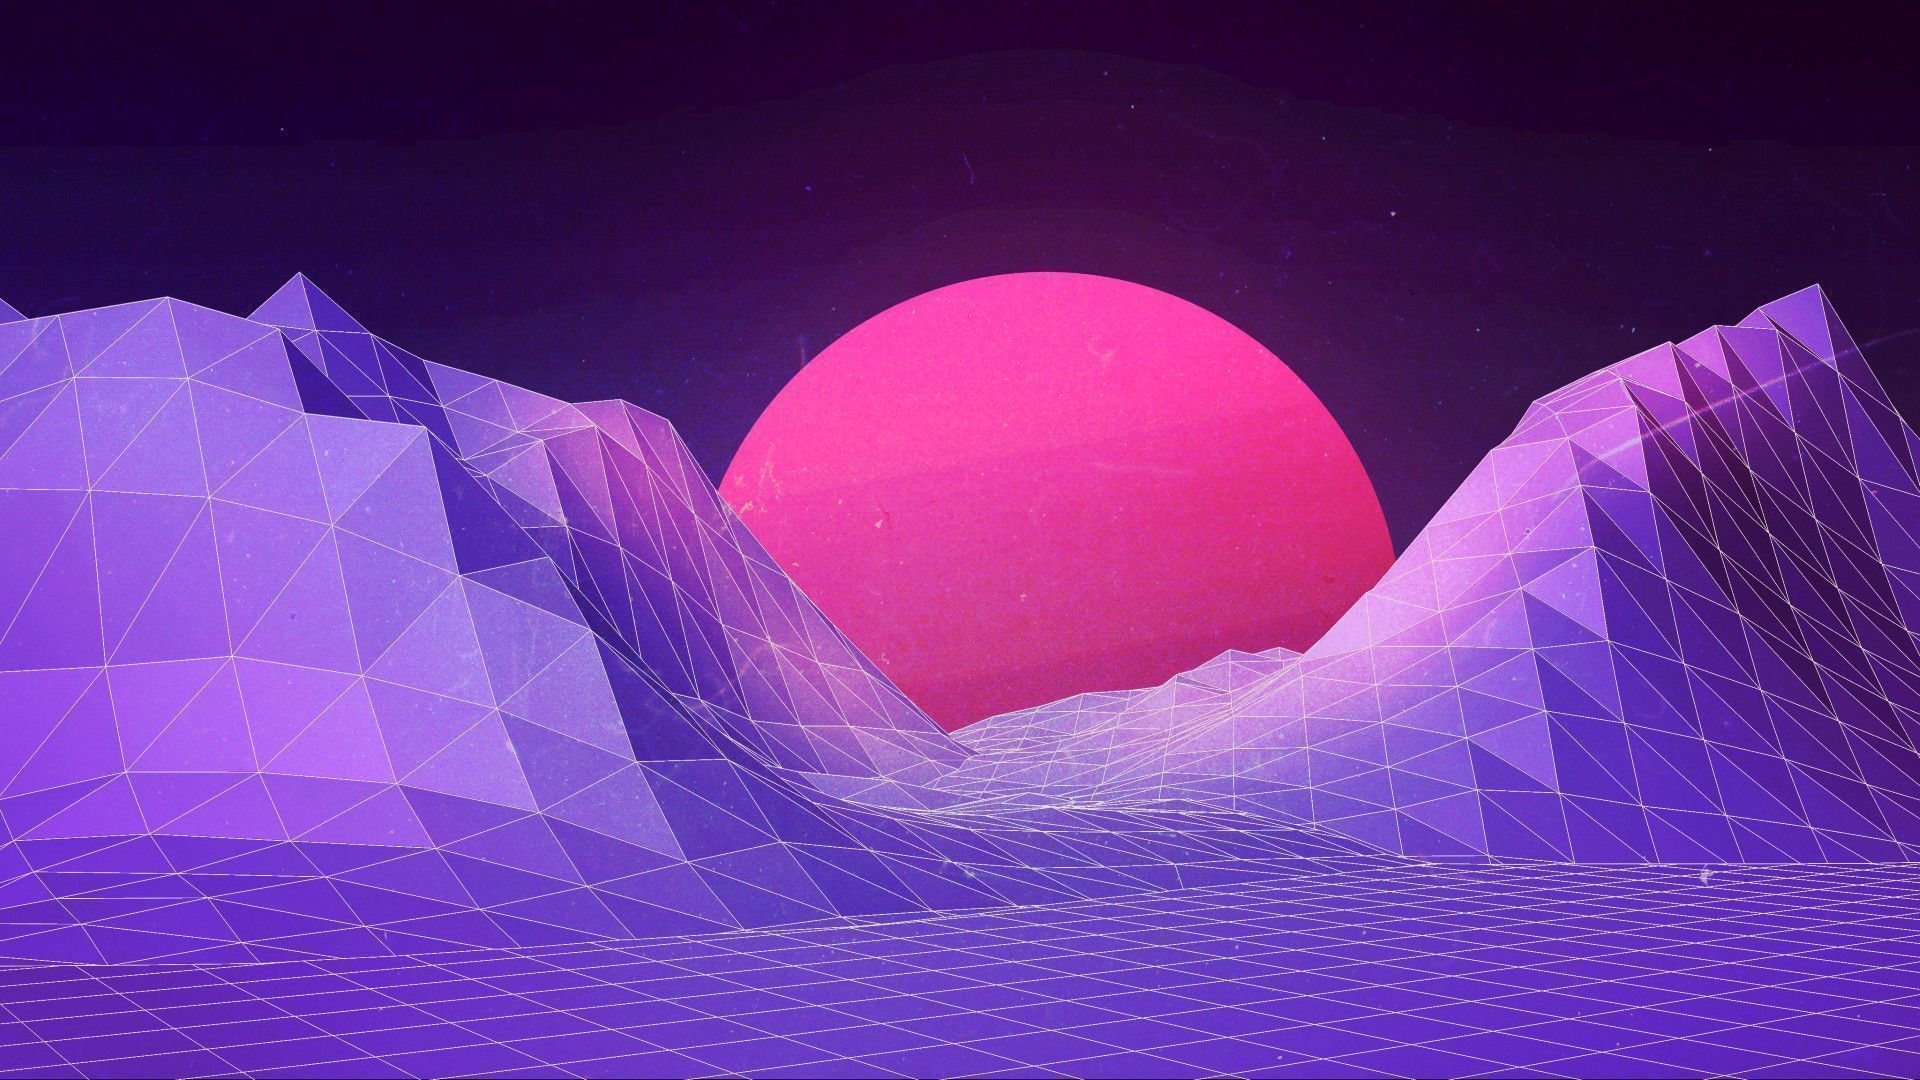 Aesthetic Wallpaper background picture. Aesthetic tumblr background, Vaporwave wallpaper, Tumblr background